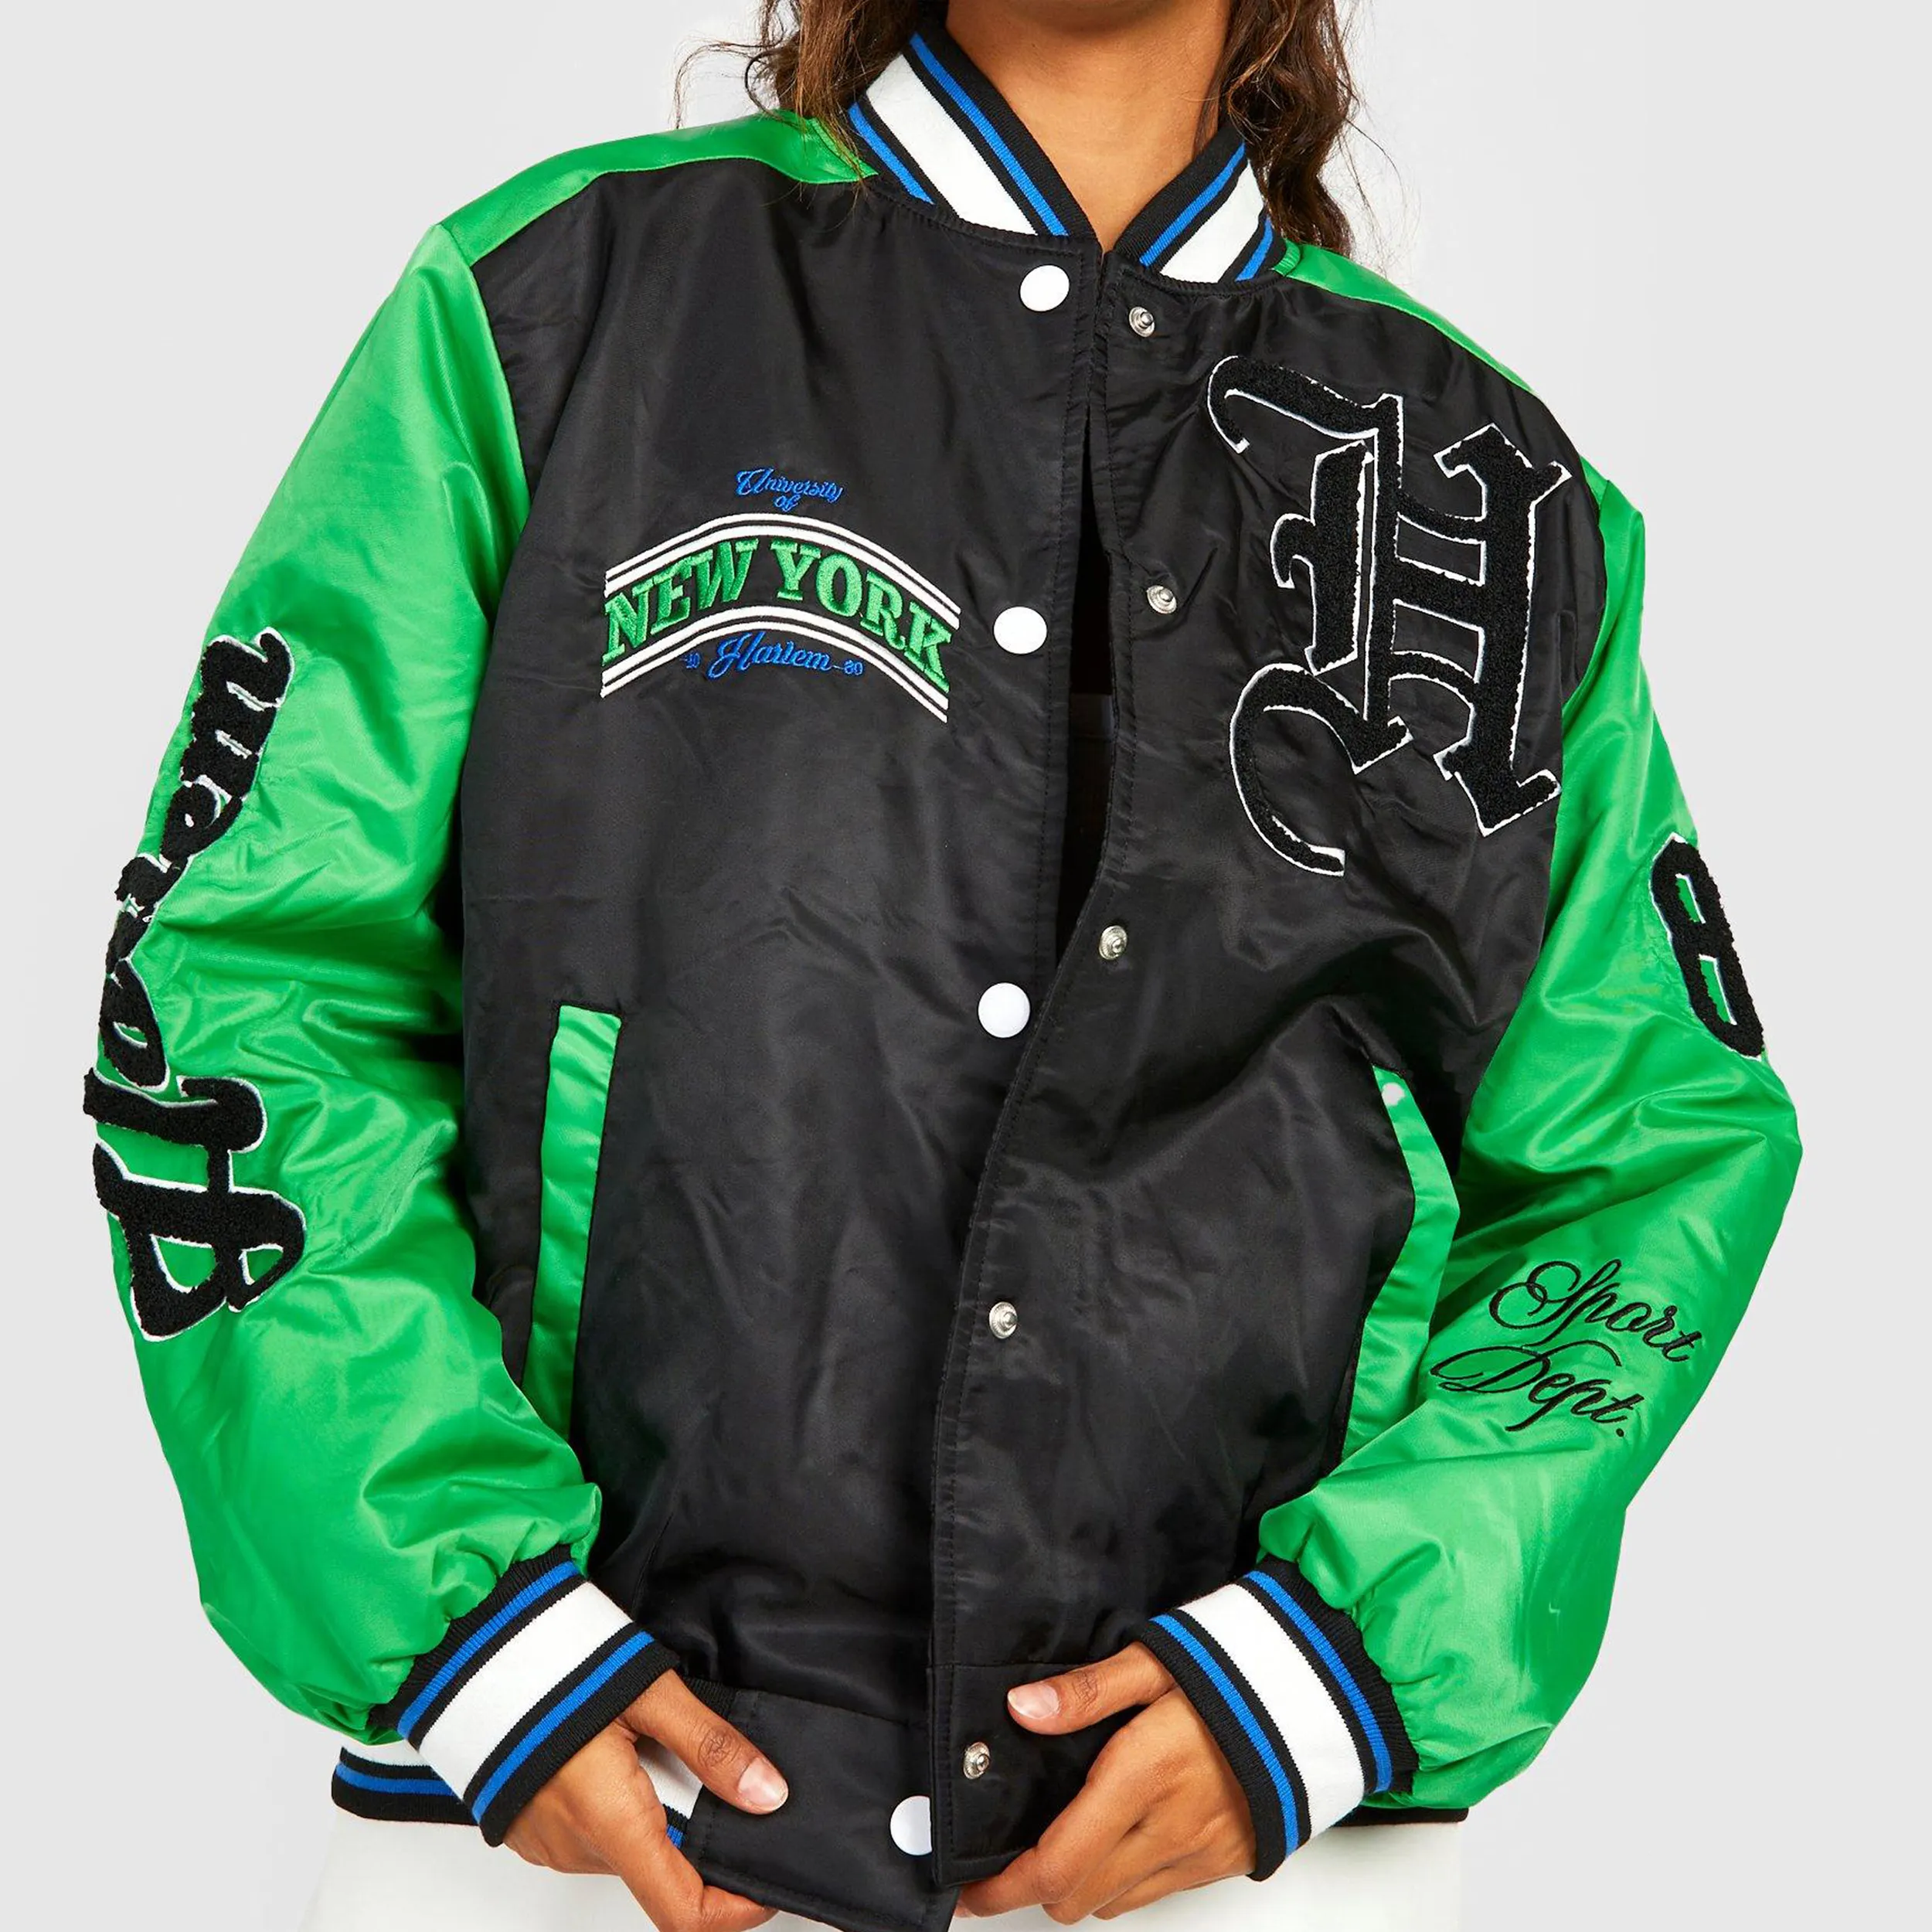 COLOUR BLOCK PATCH DETAIL VARSITY BOMBER varsity jacket boasts a baseball collar letterman style and applique details